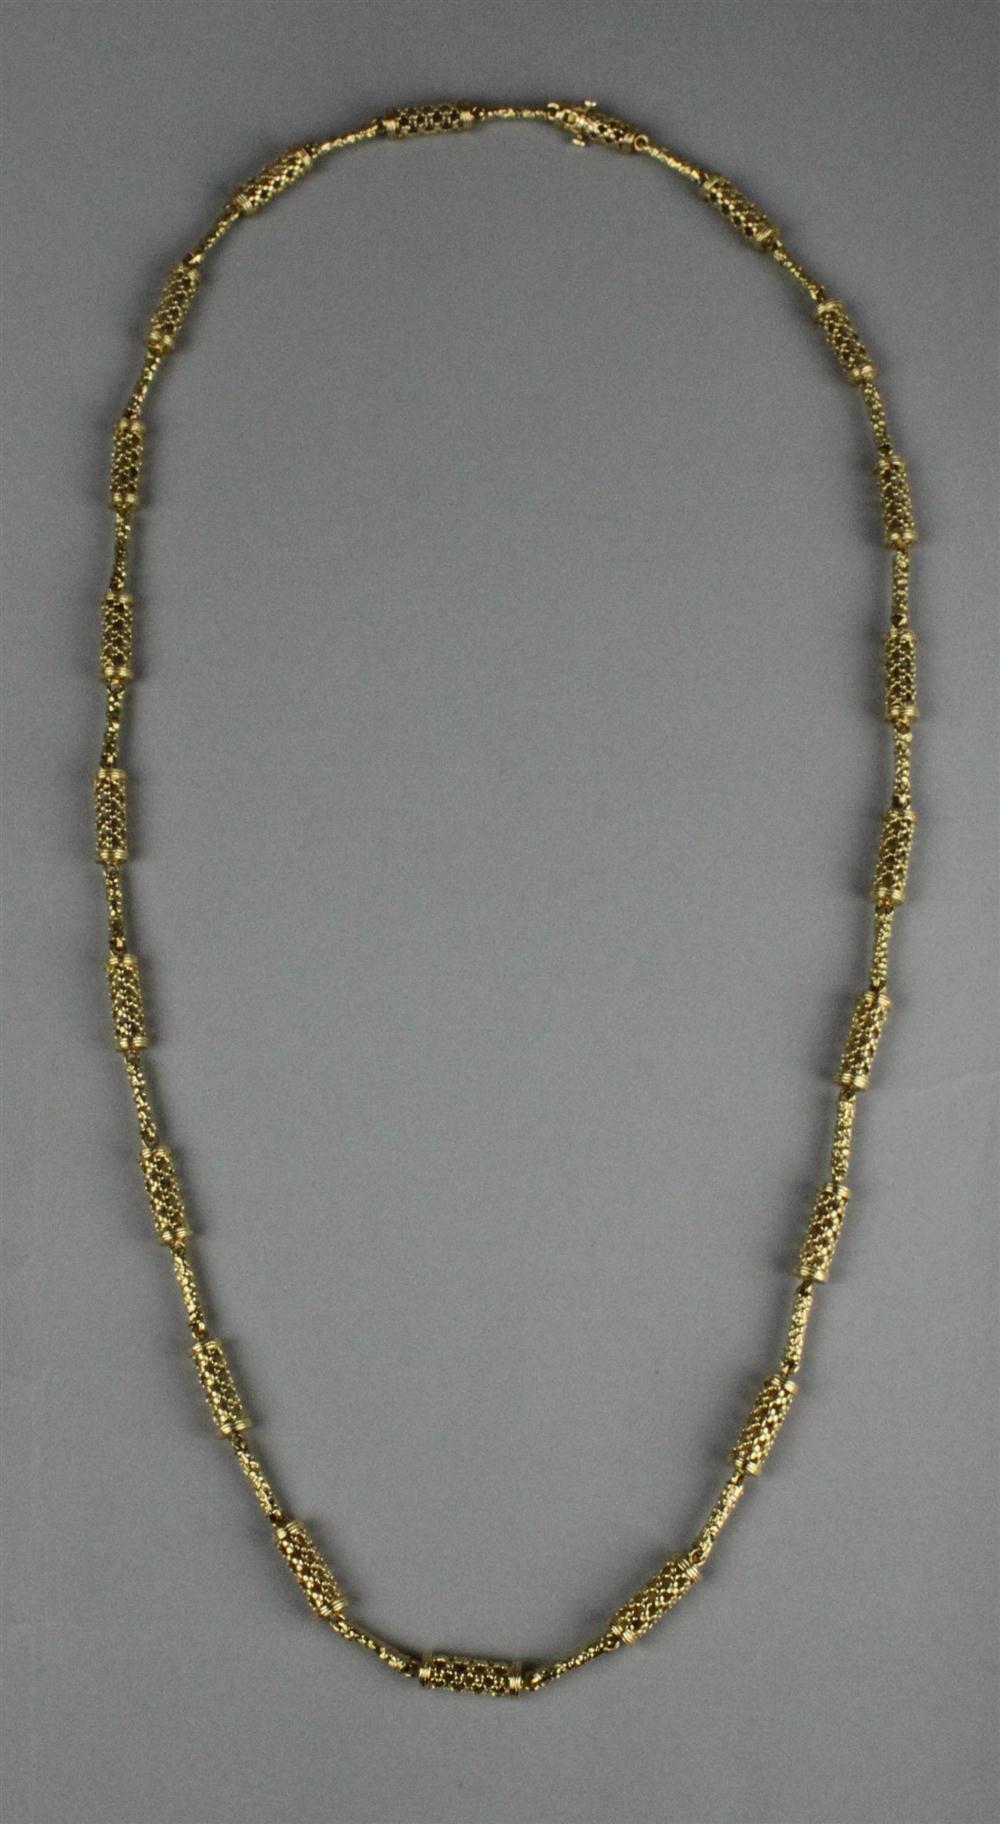 LADY'S 18K YELLOW GOLD LINK NECKLACE